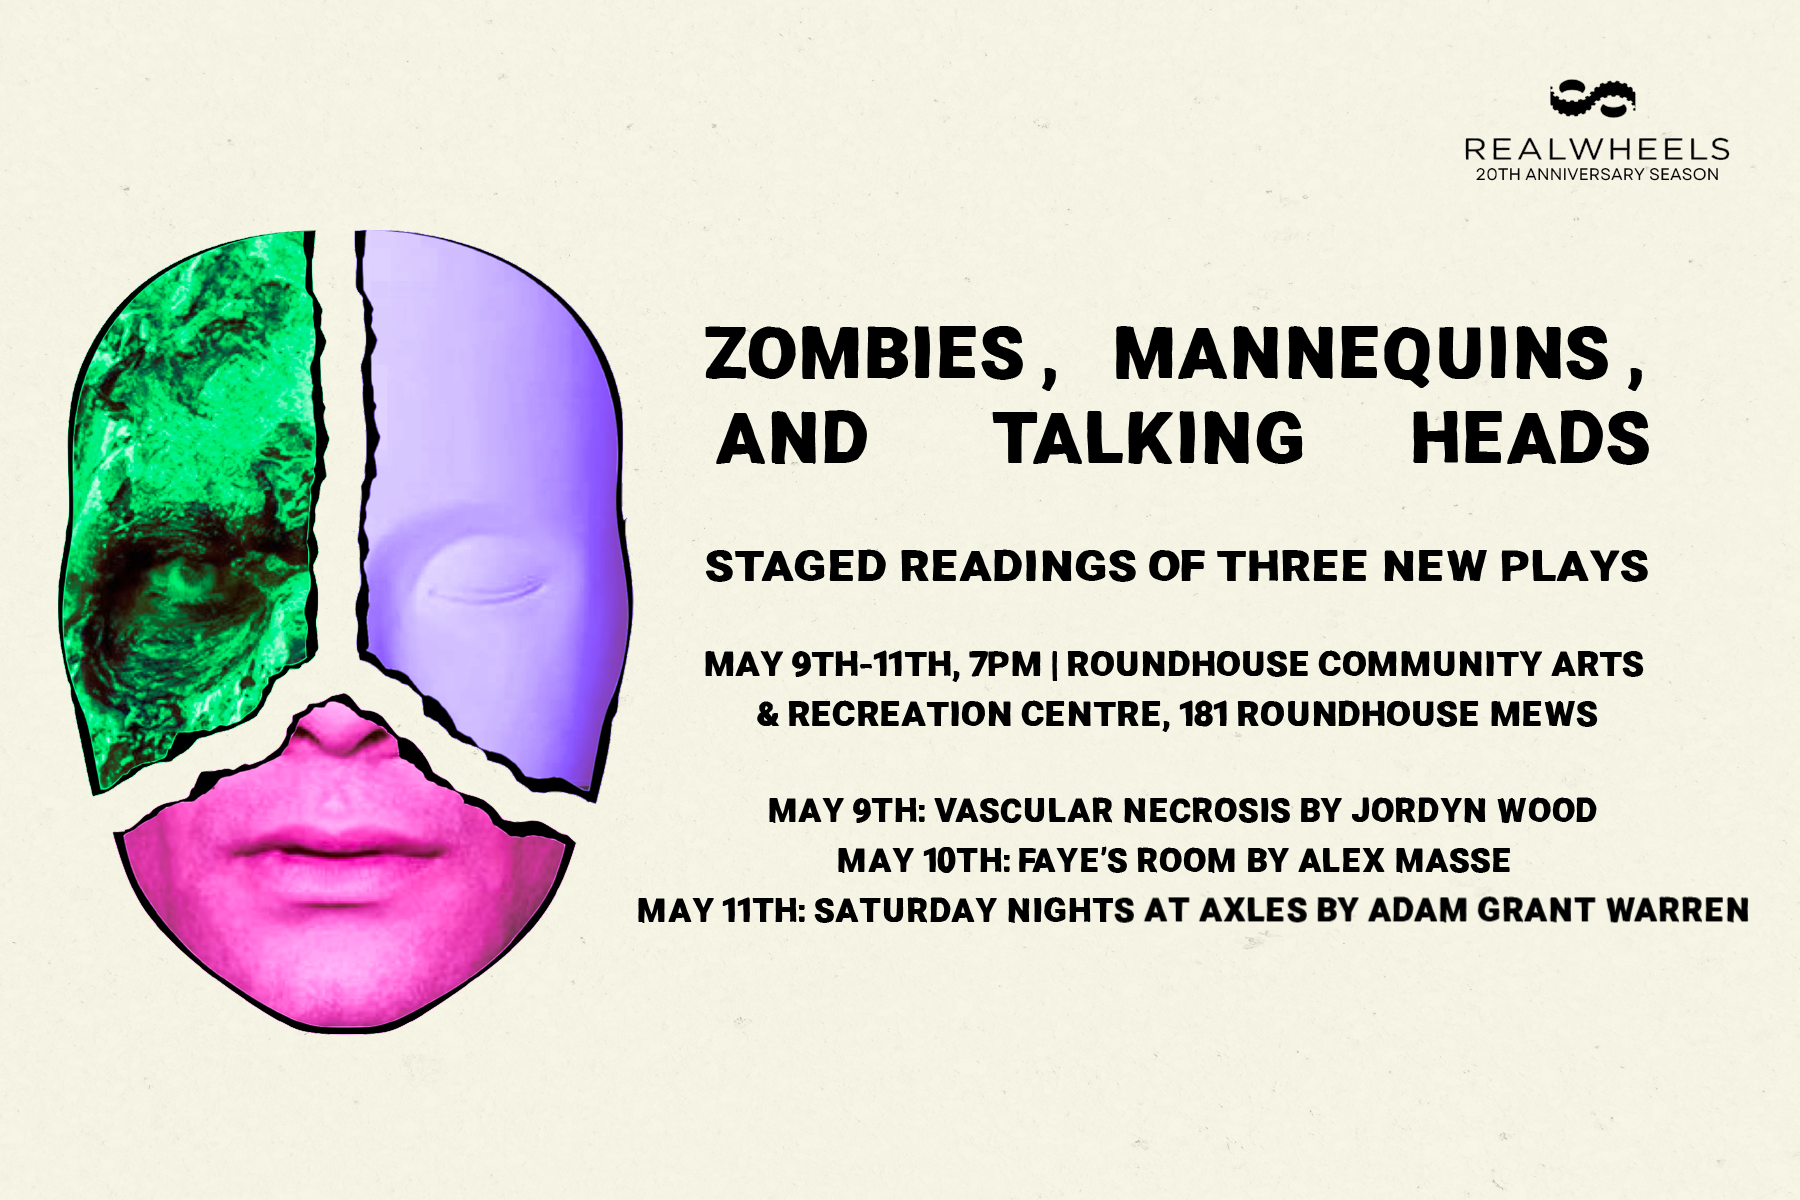 Zombies, Mannequins, and Talking Heads